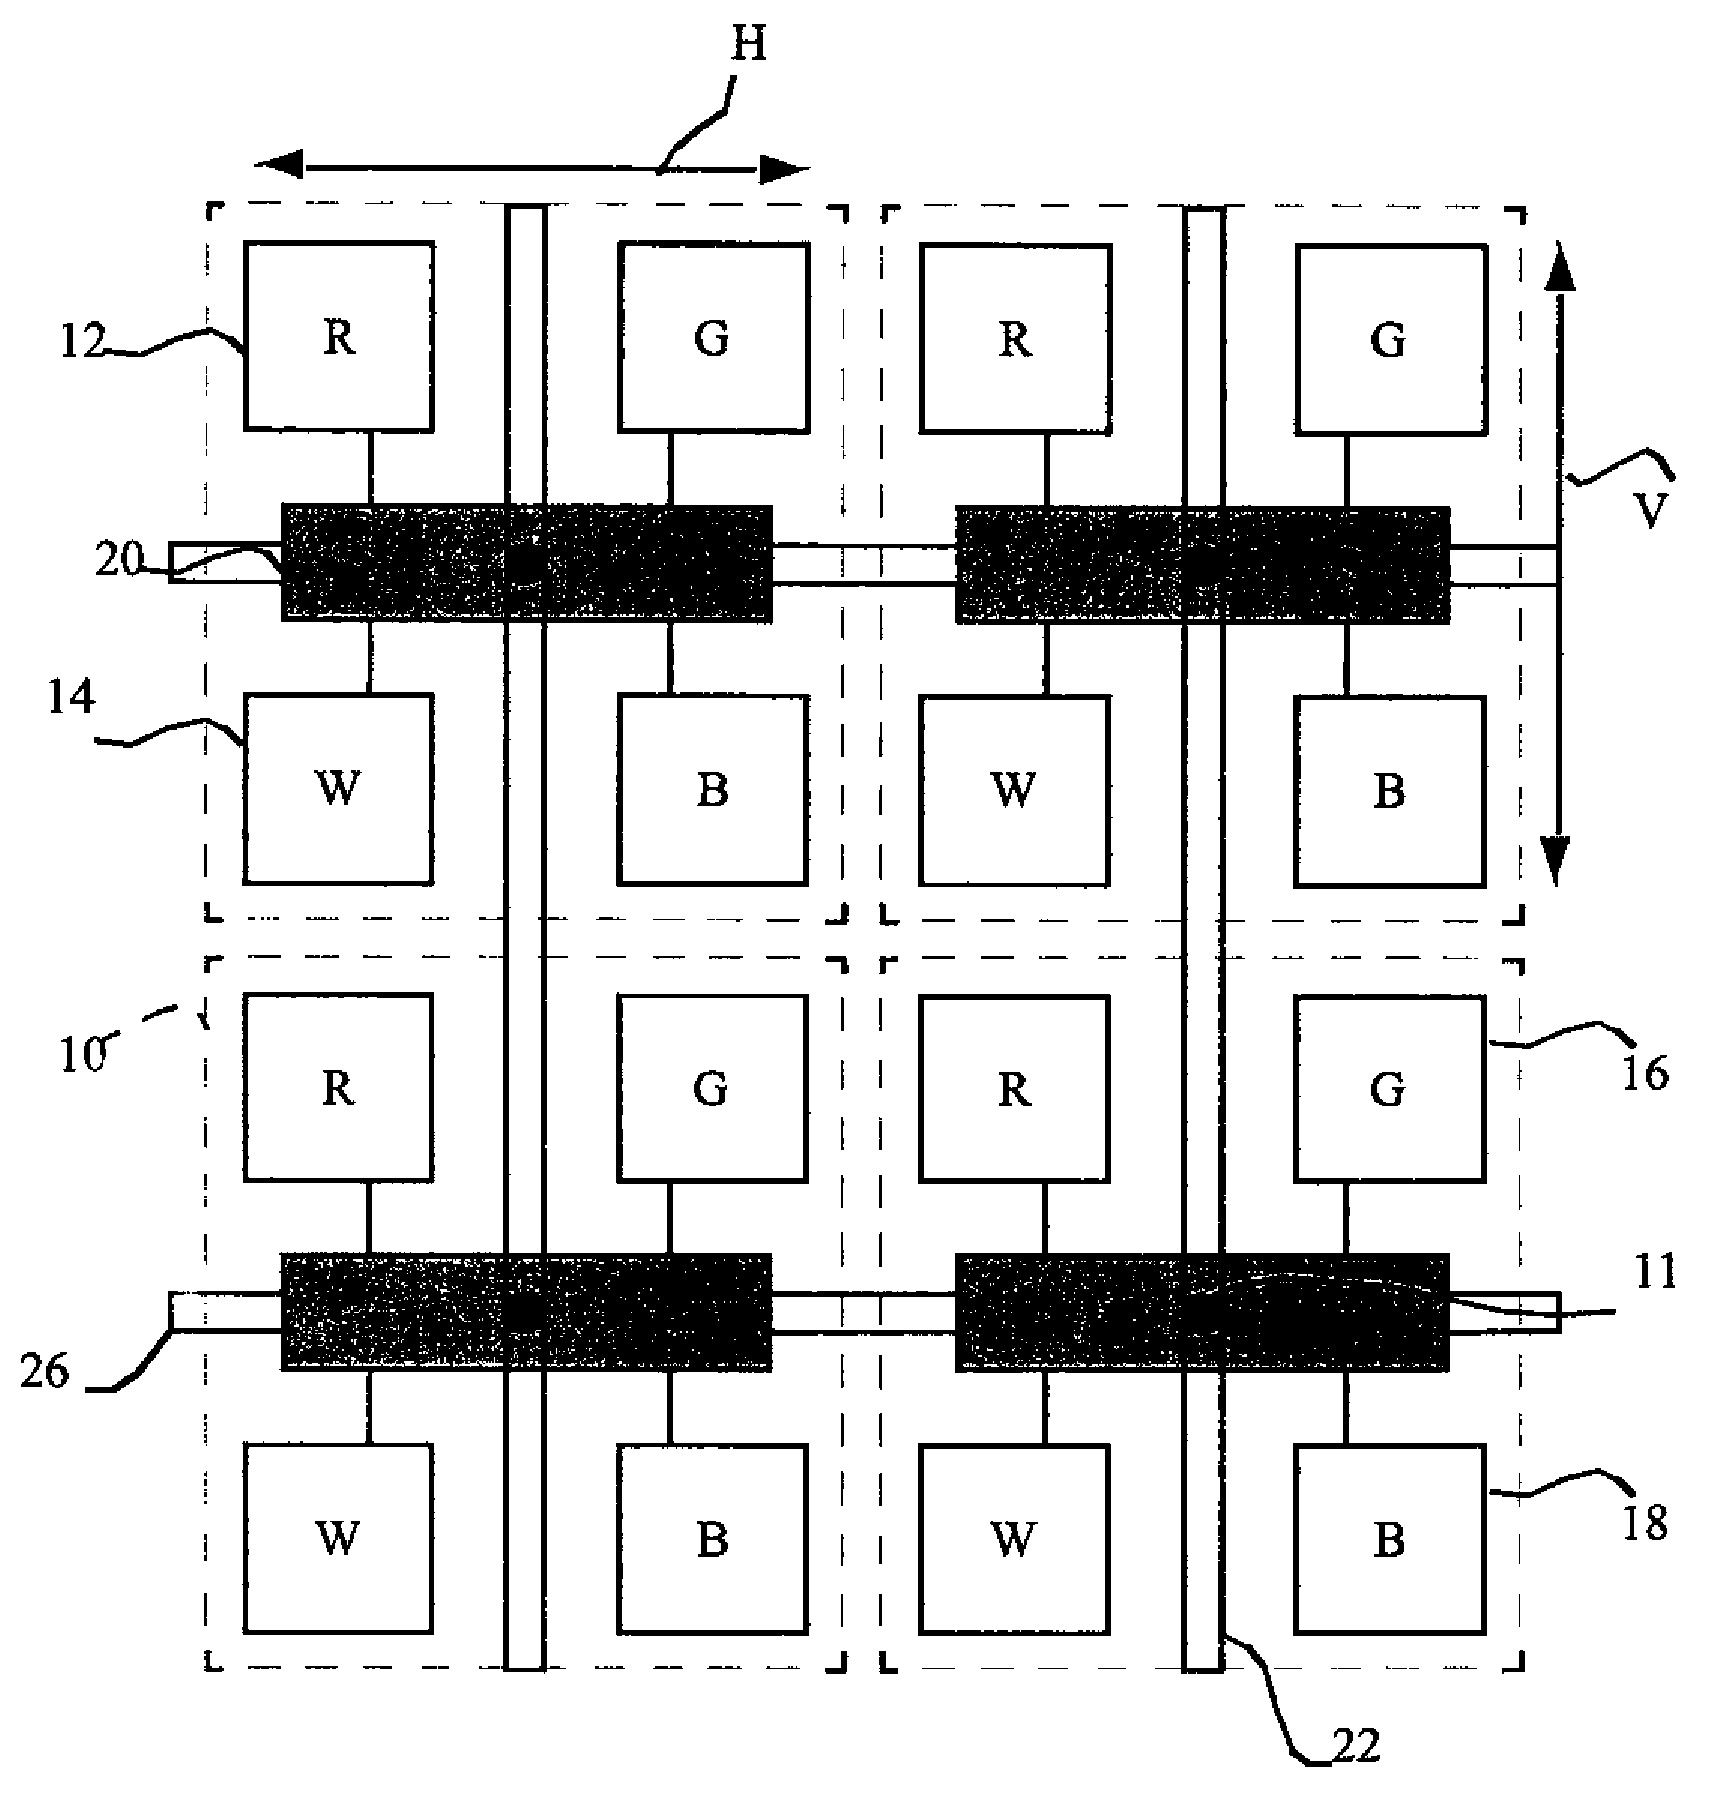 Dividing pixels between chiplets in display device